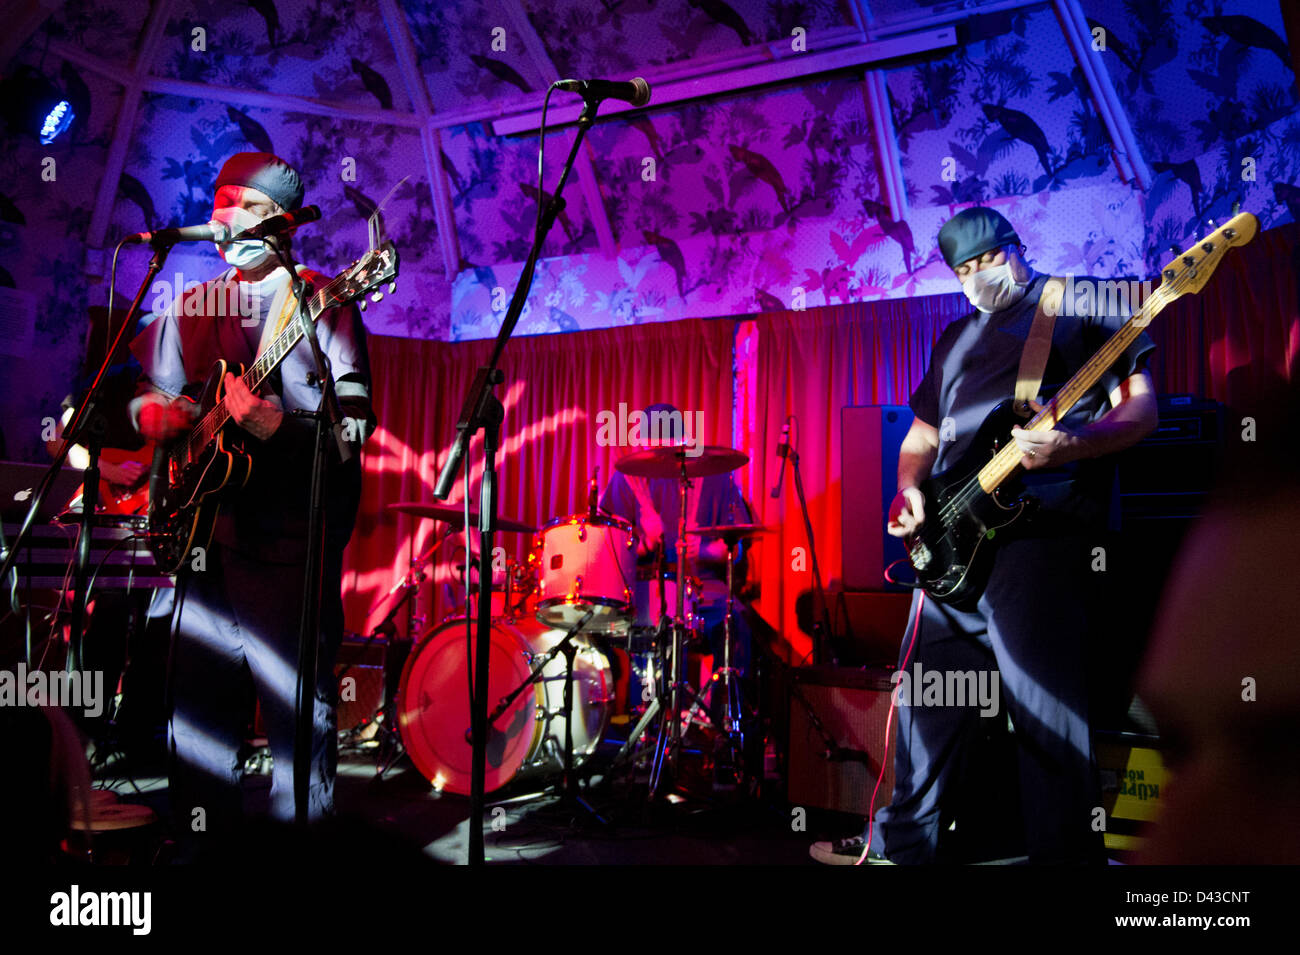 Alternative rock band Clinic in concert at the Deaf Institute, Manchester, on 2 March 2013. The band perform live with surgical masks and gowns. Stock Photo